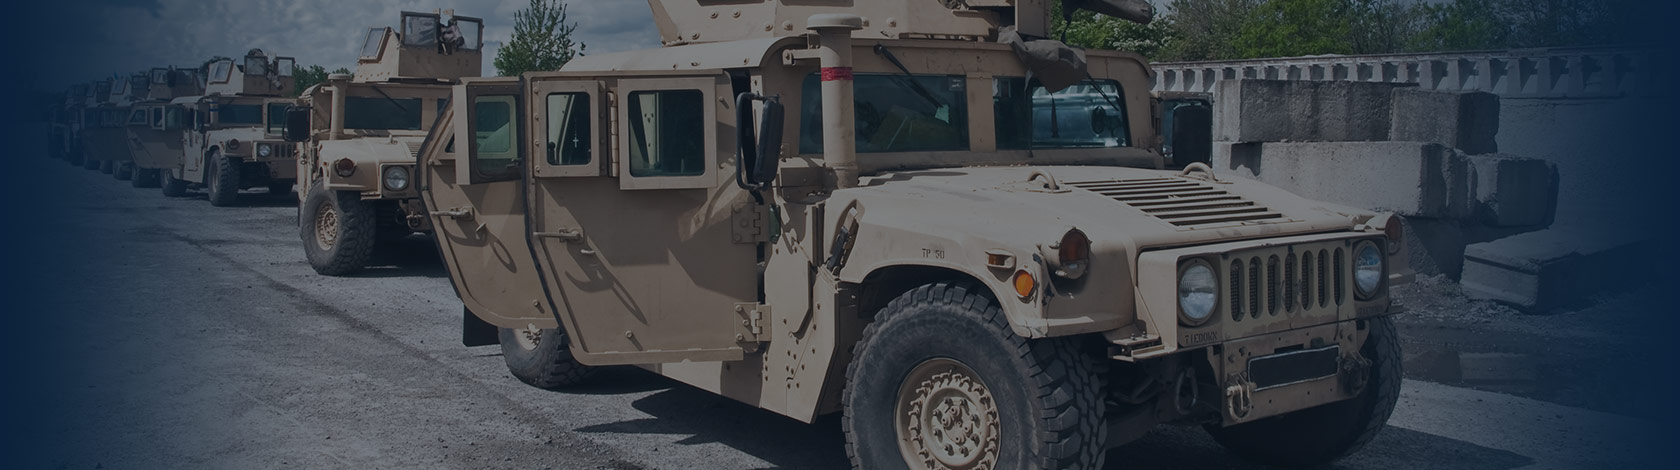 military vehicle accident banner